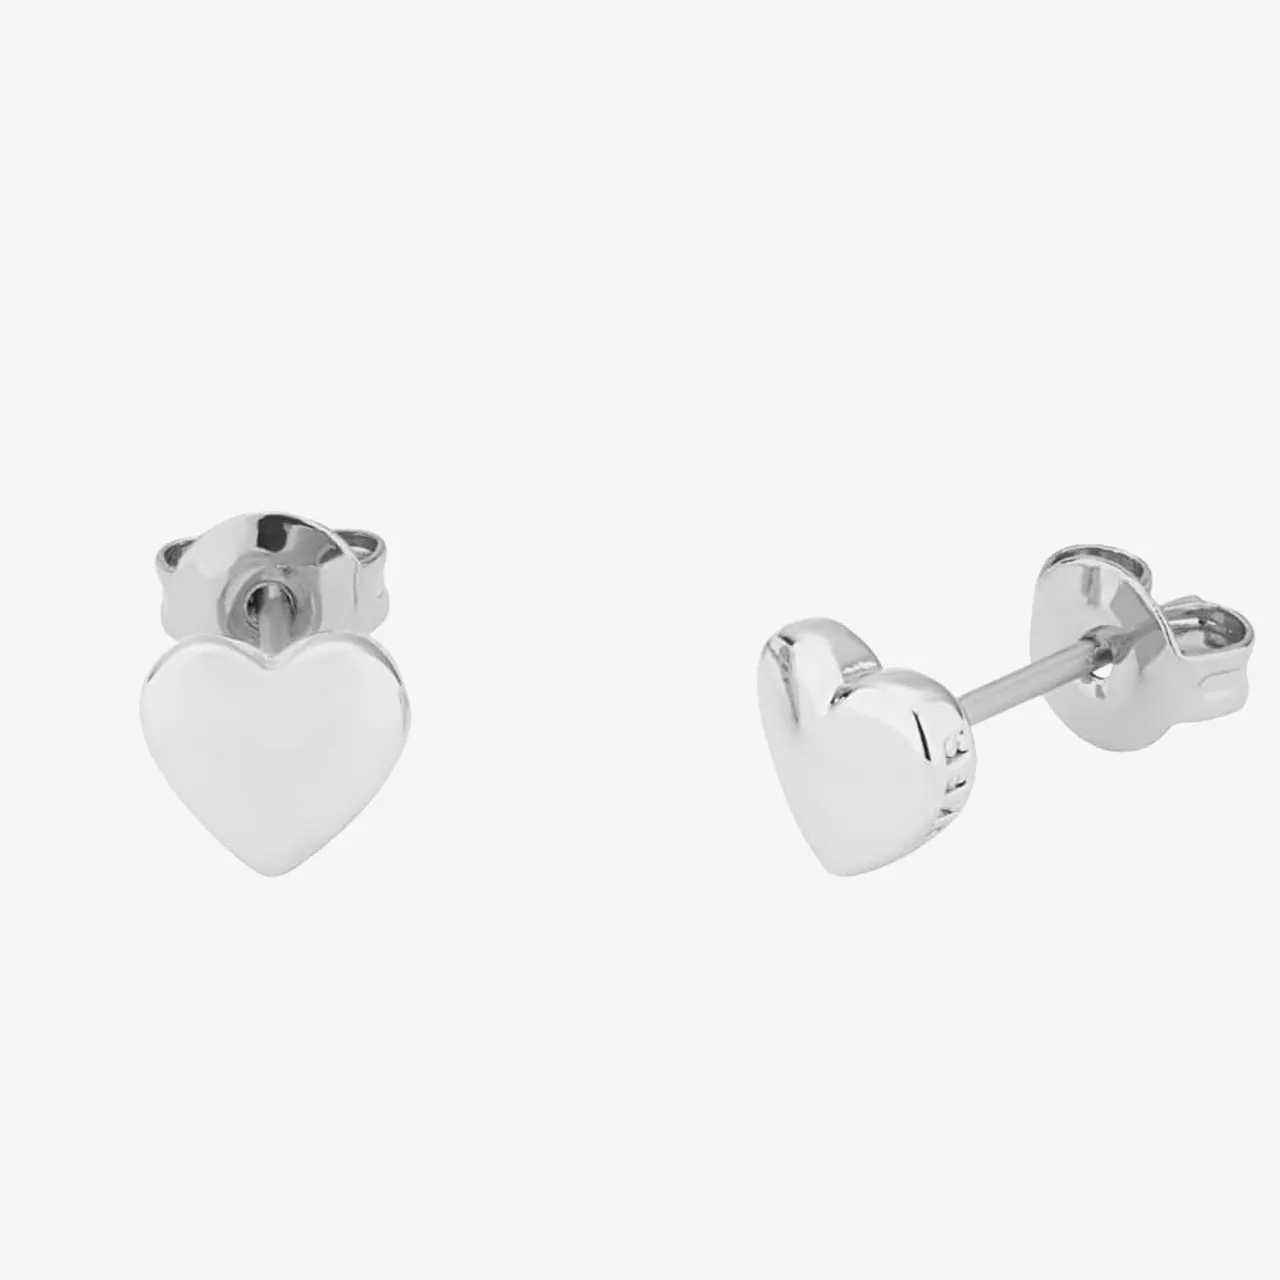 Ted Baker Harly Silver Finish Tiny Heart Stud Earrings TBJ872-01-03